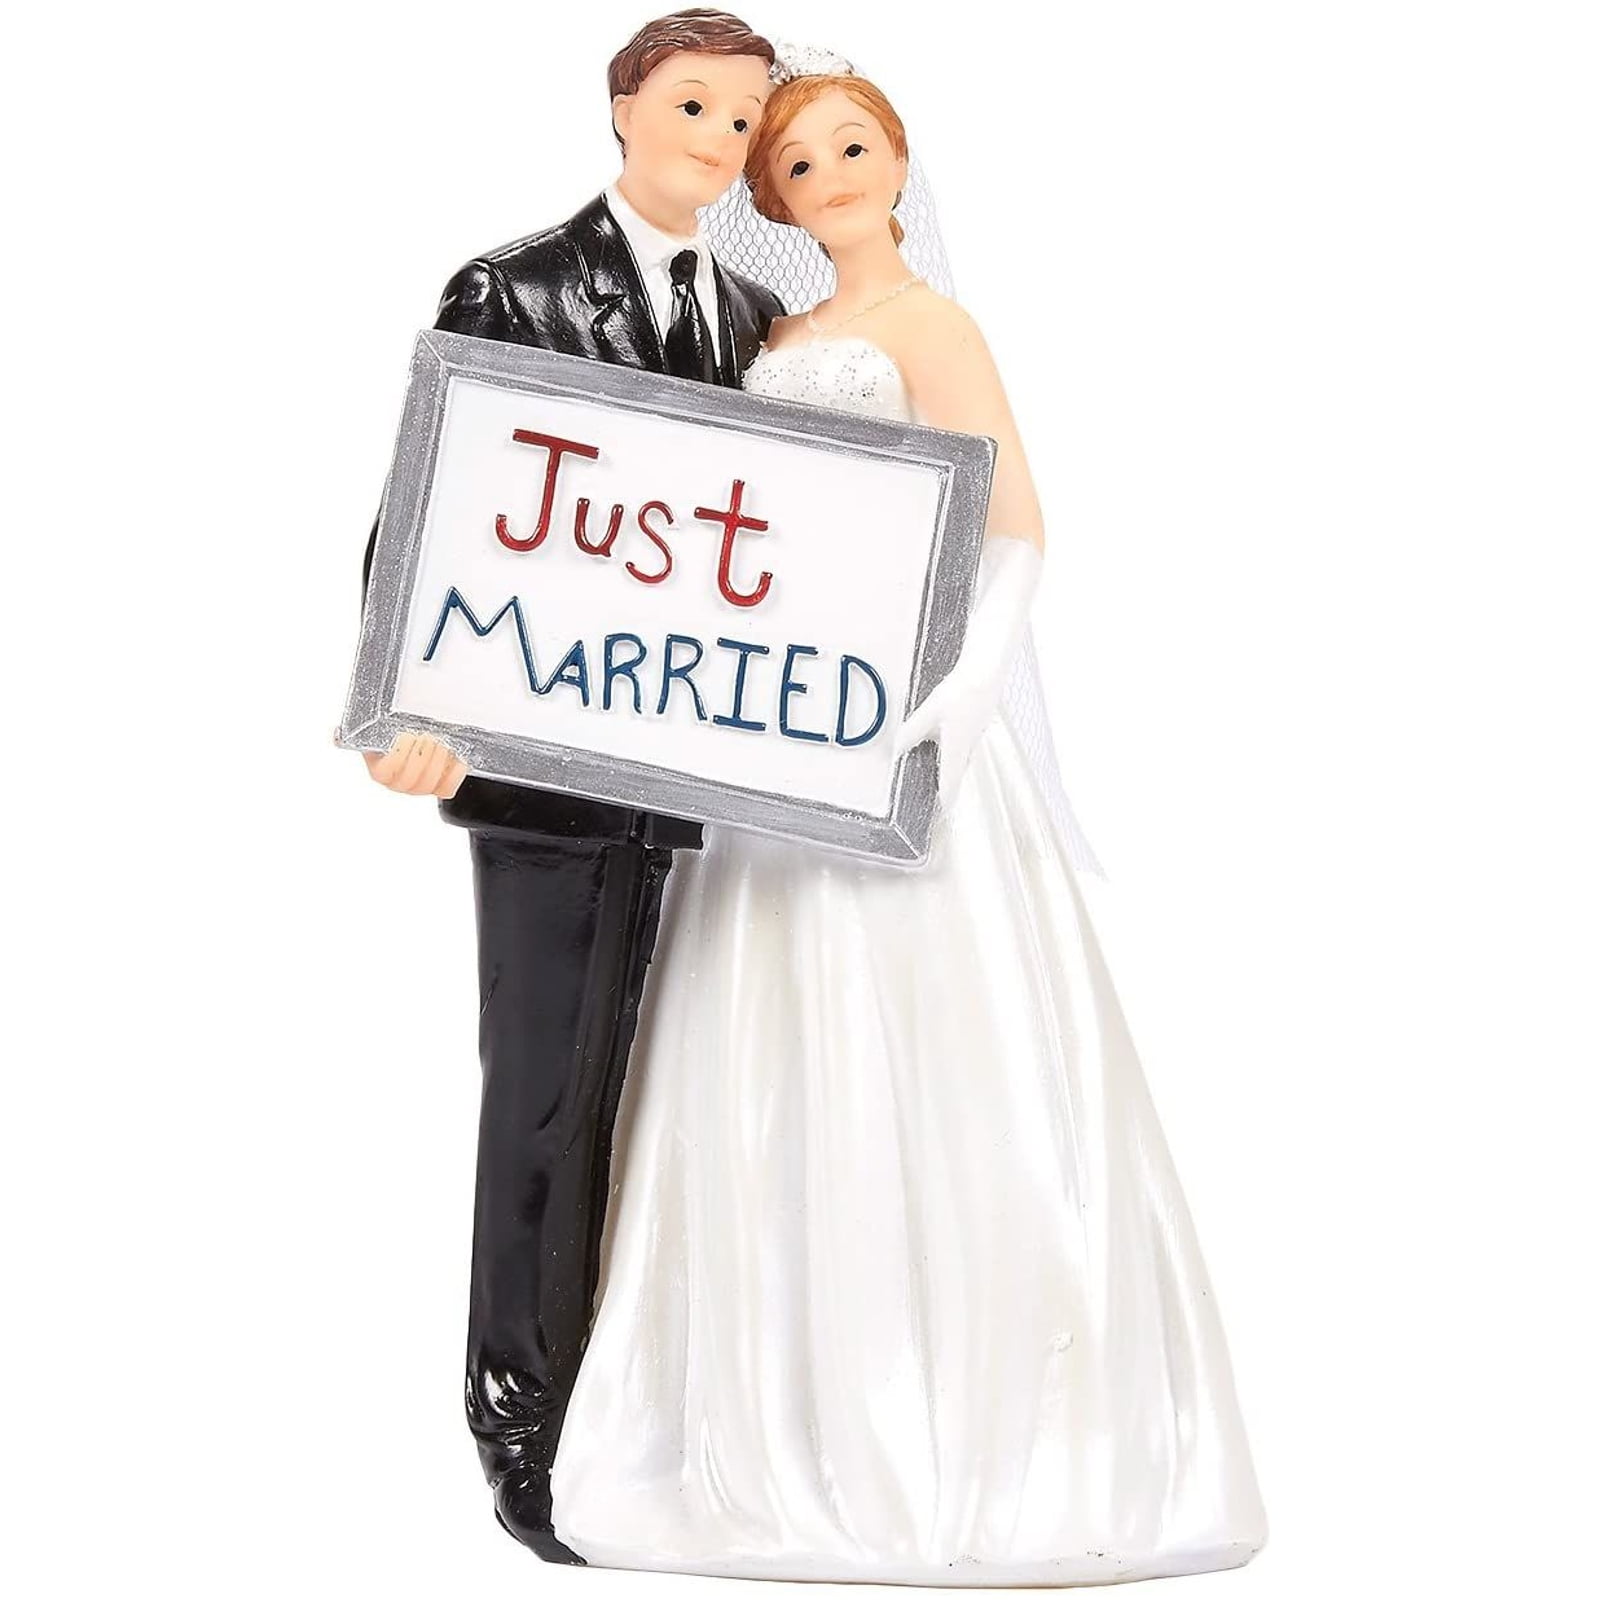 To Have and to Hold Bride Carrying Groom Funny Wedding Porcelain Cake Topper 